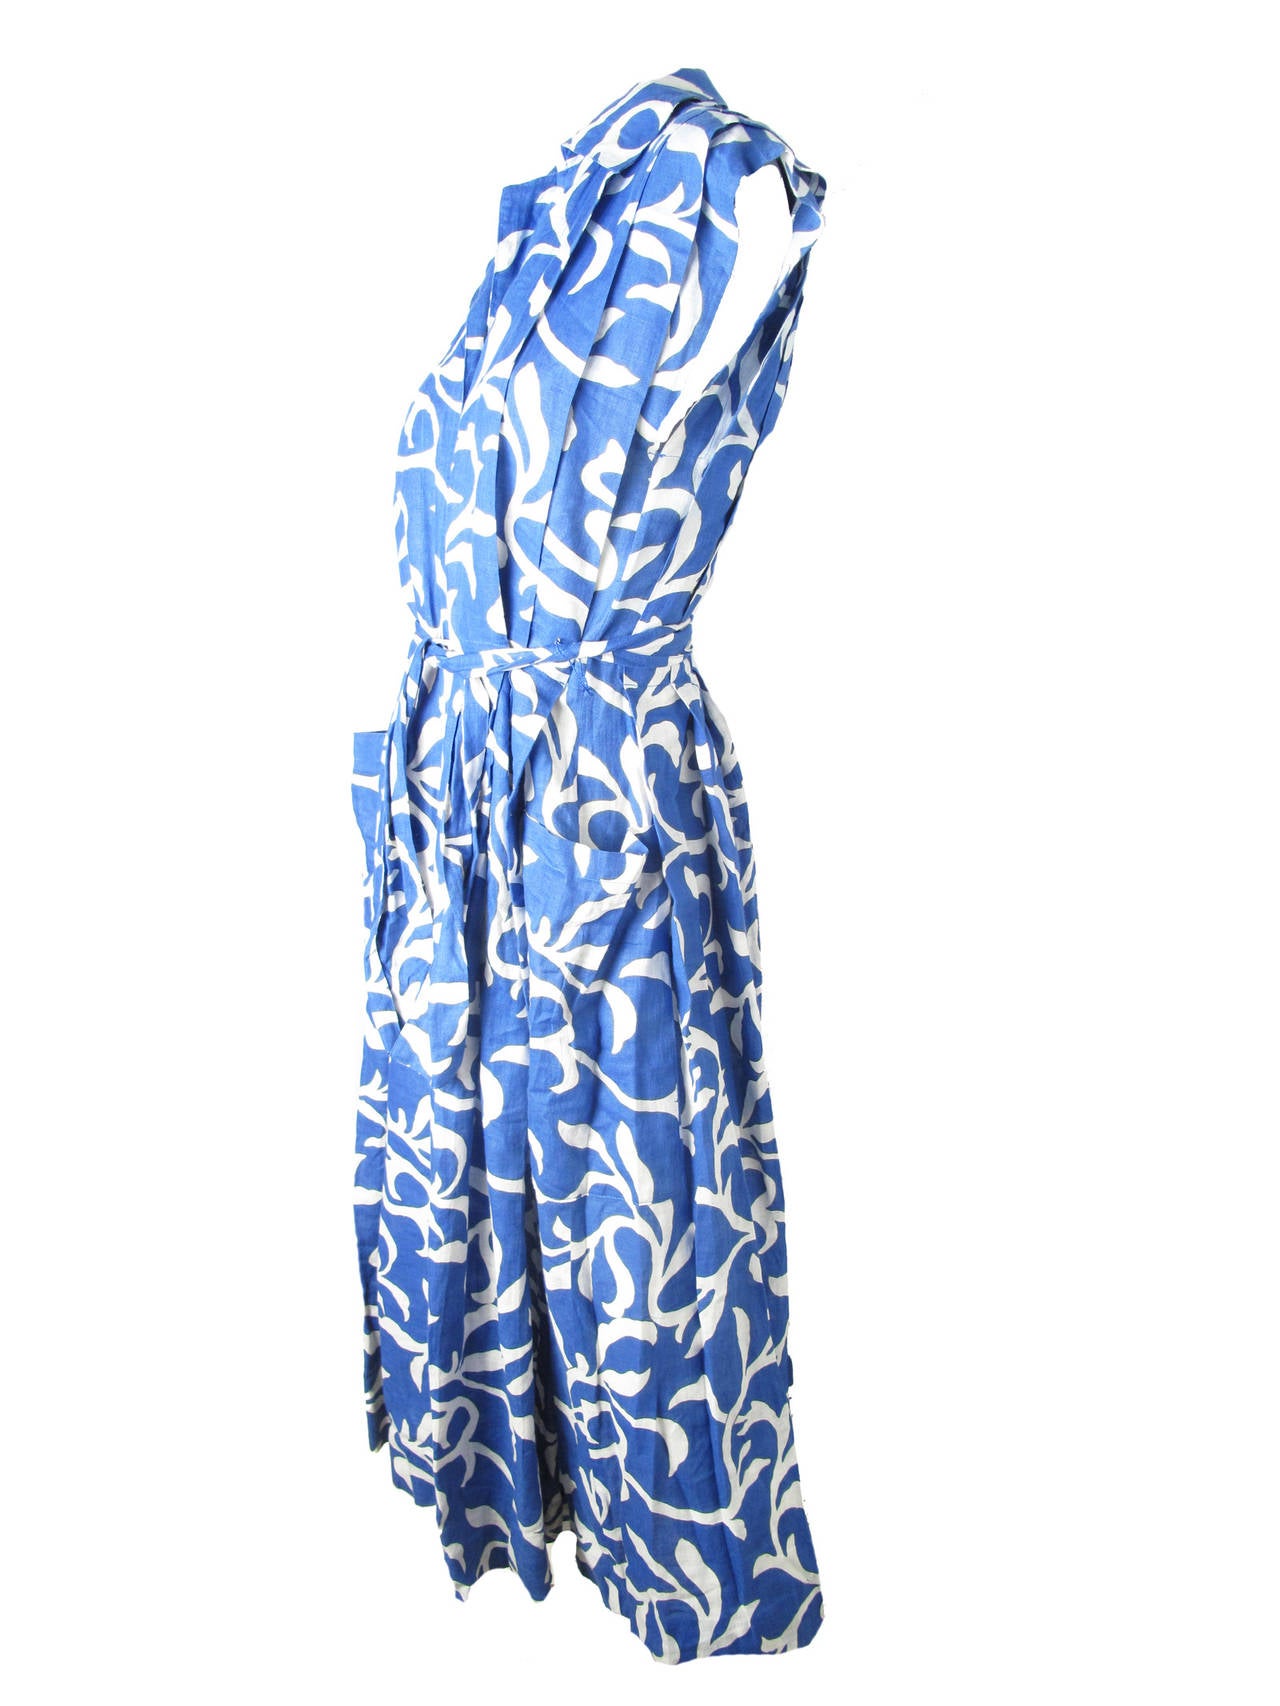 Guy Laroche blue and white linen sundress with large pocket and pleating on front.  Belt around waist.  Size 34

34